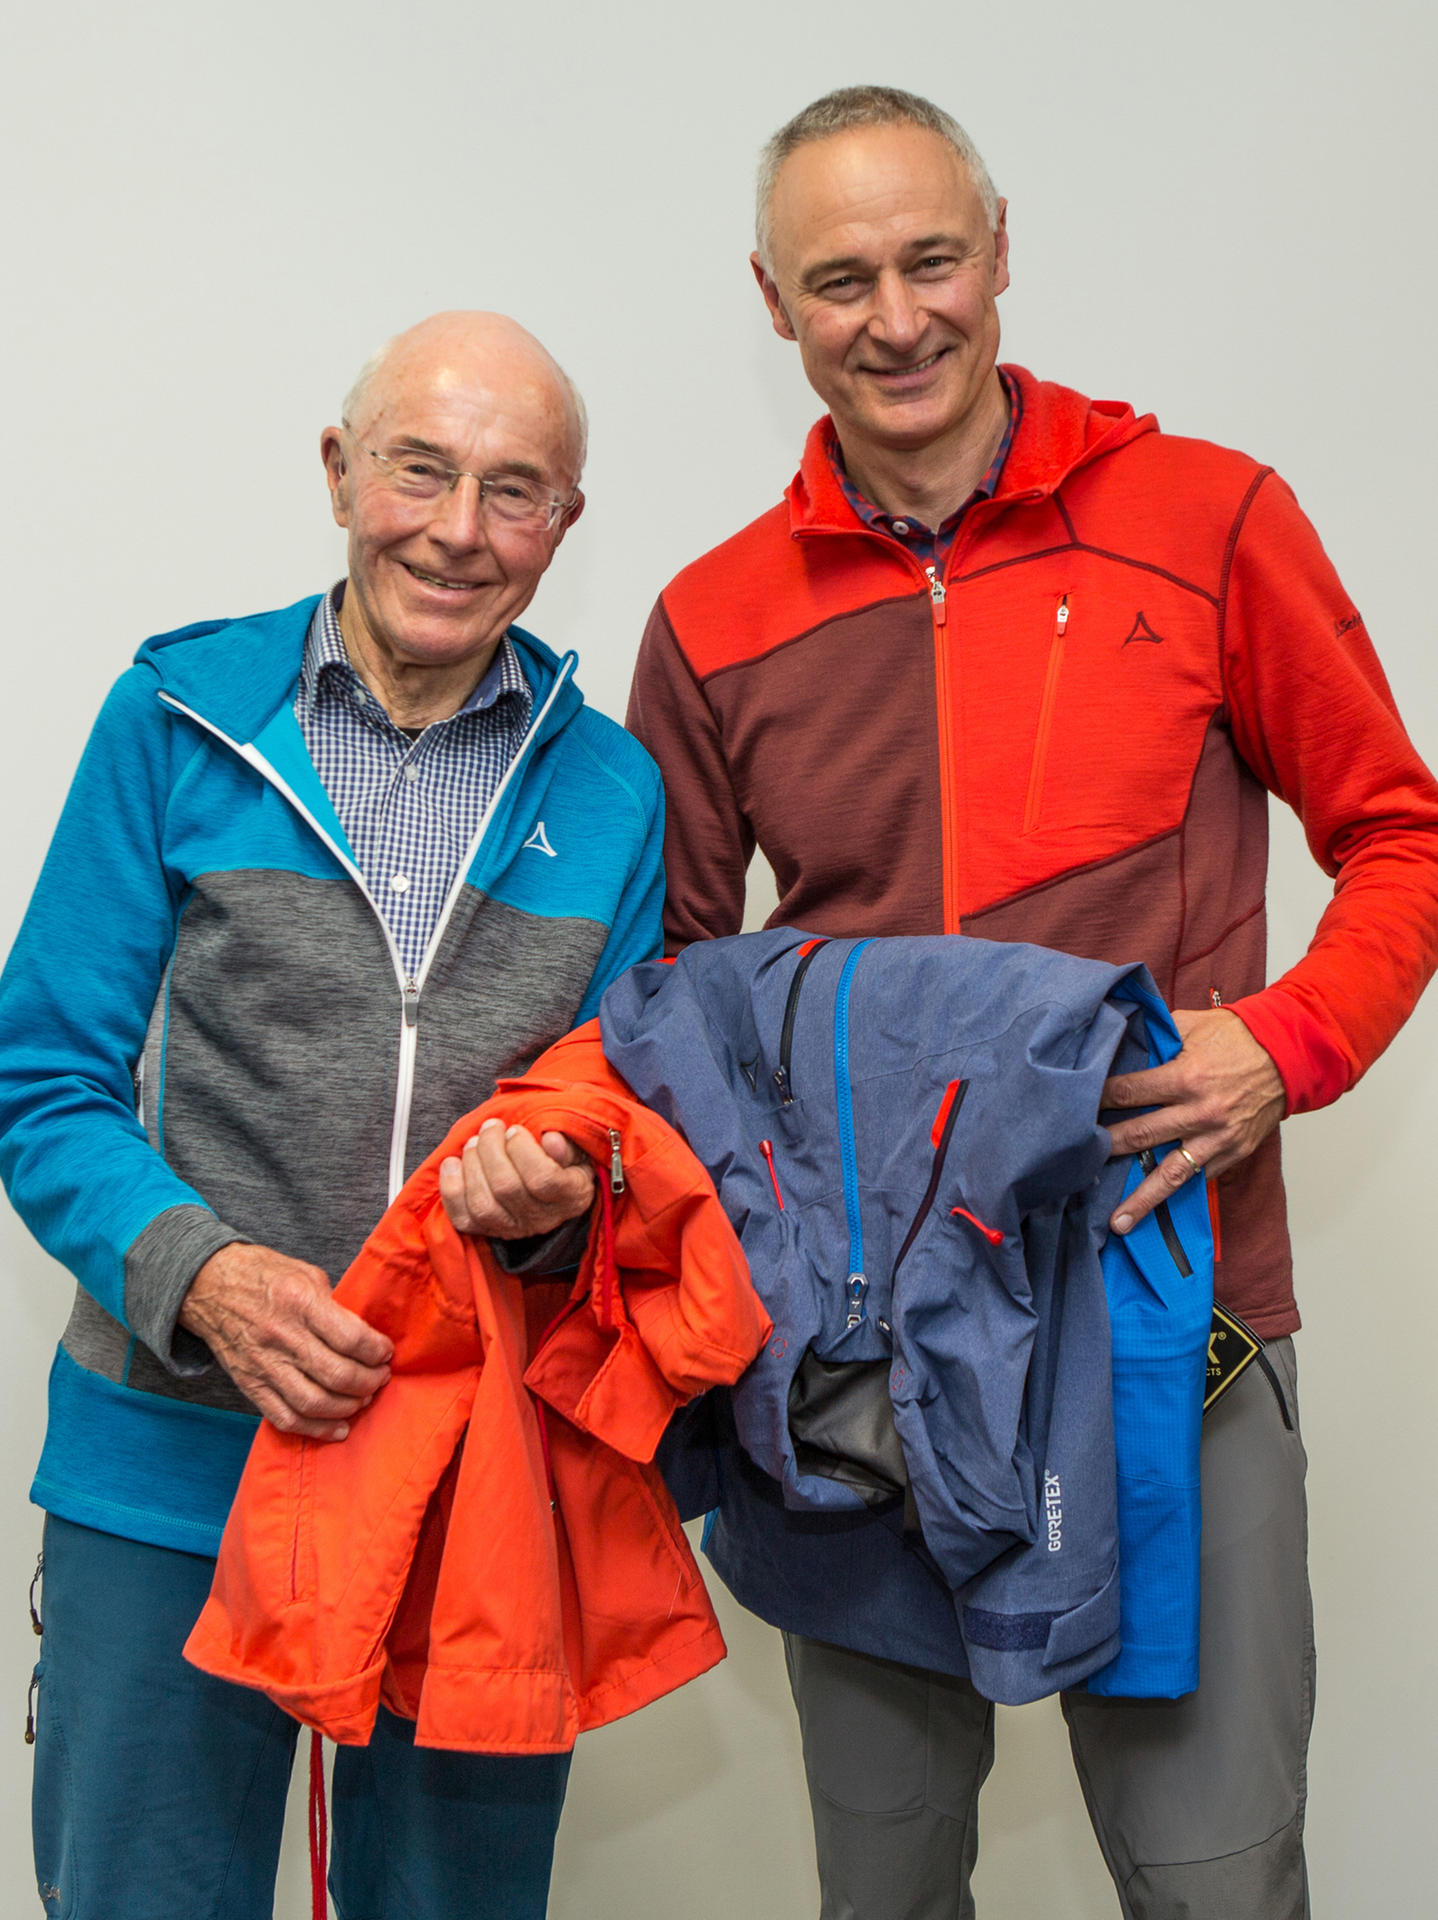 Mourning for outdoor legend: 